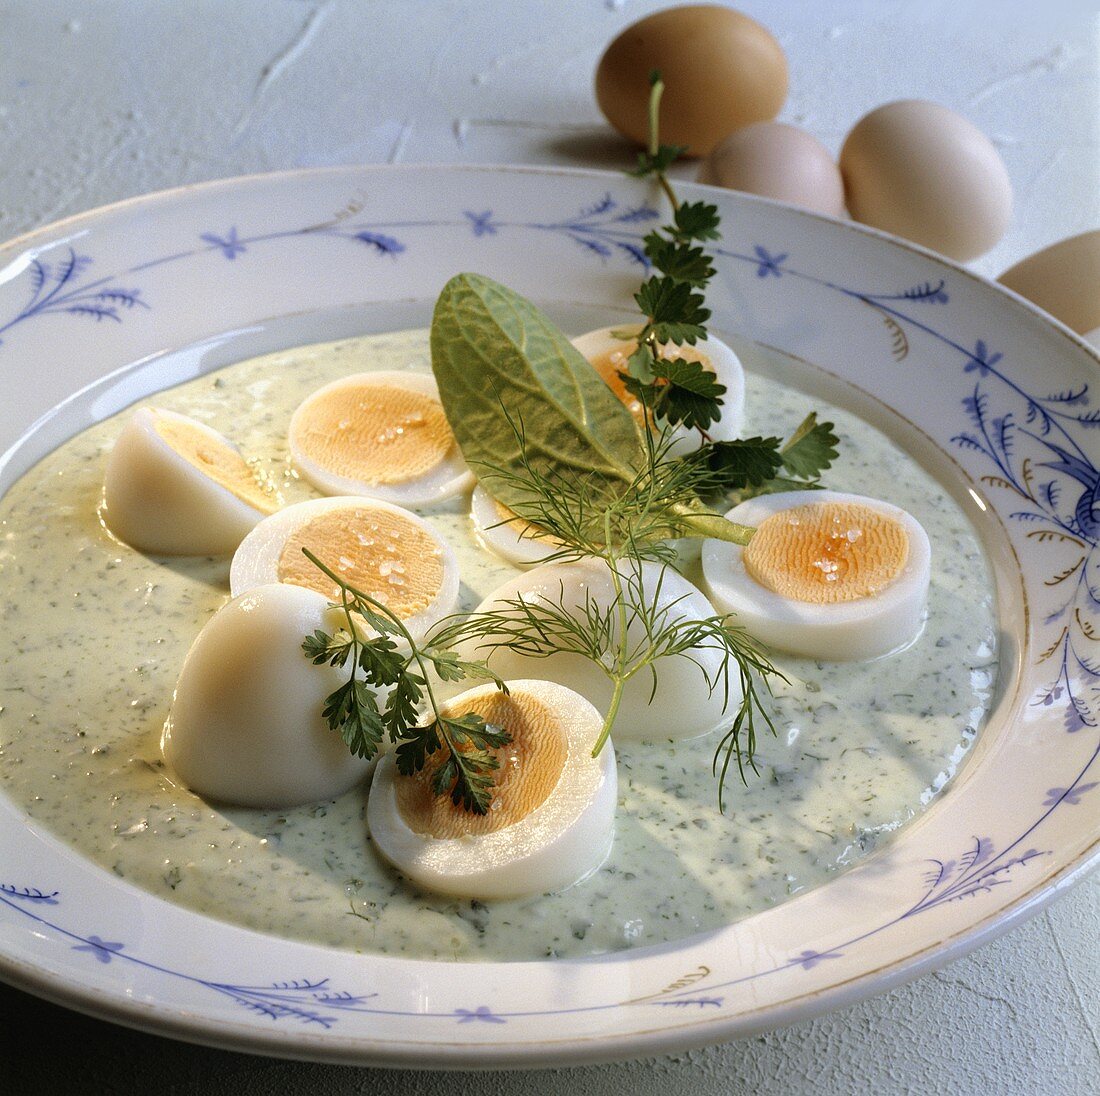 Boiled eggs in green sauce